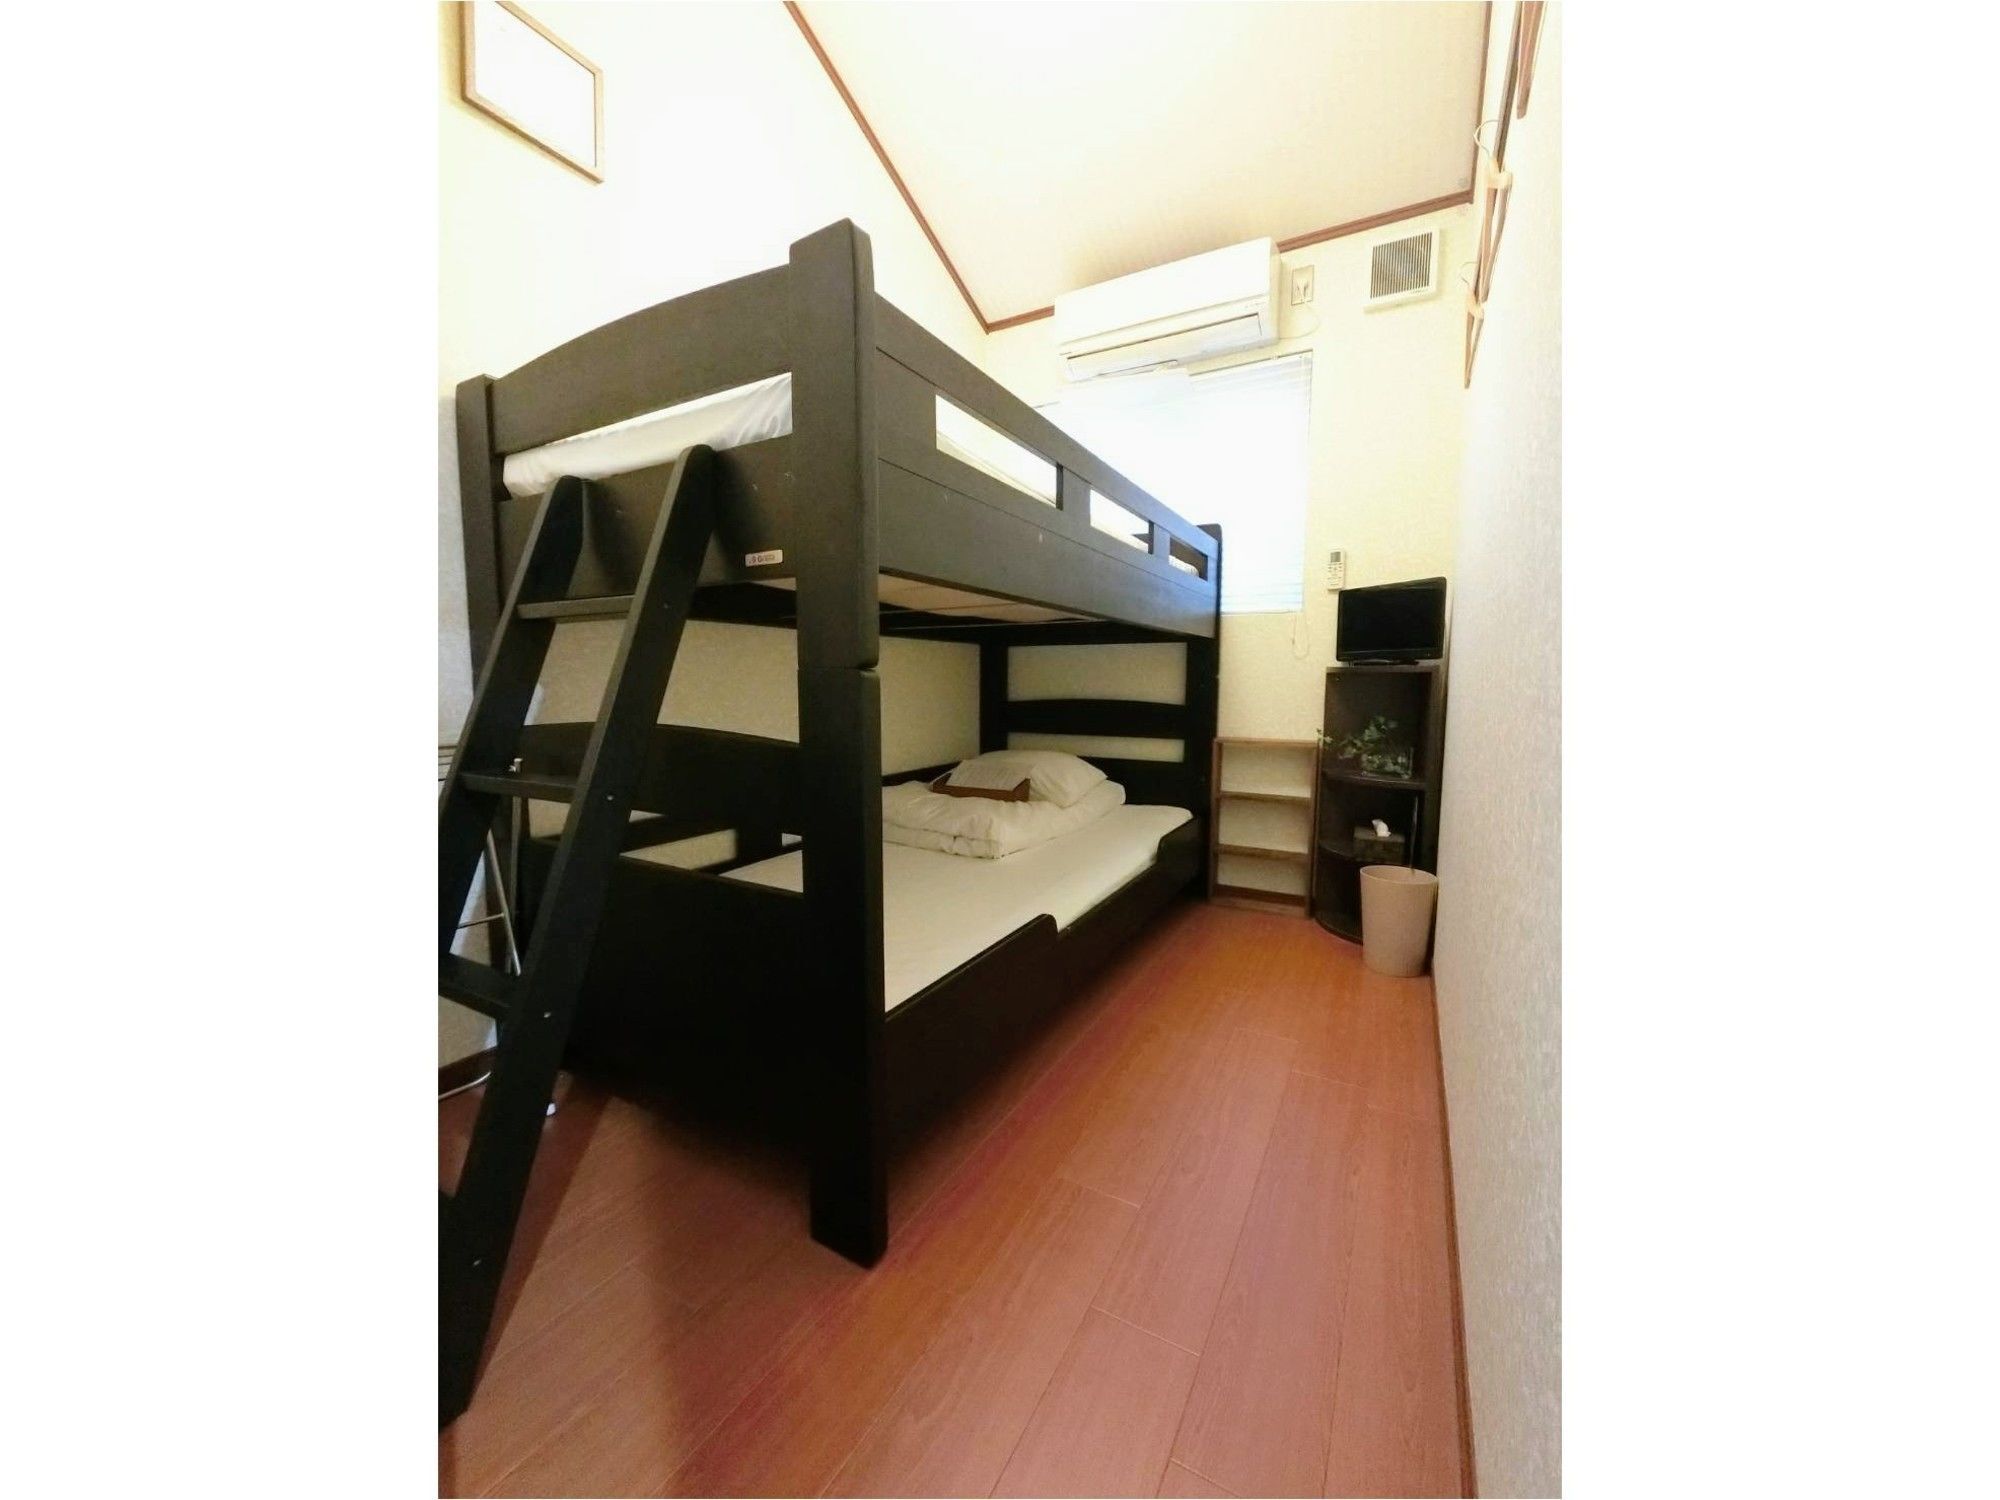 Guest House Na-No-Hana - Hostel, Caters To Women 京都 外观 照片